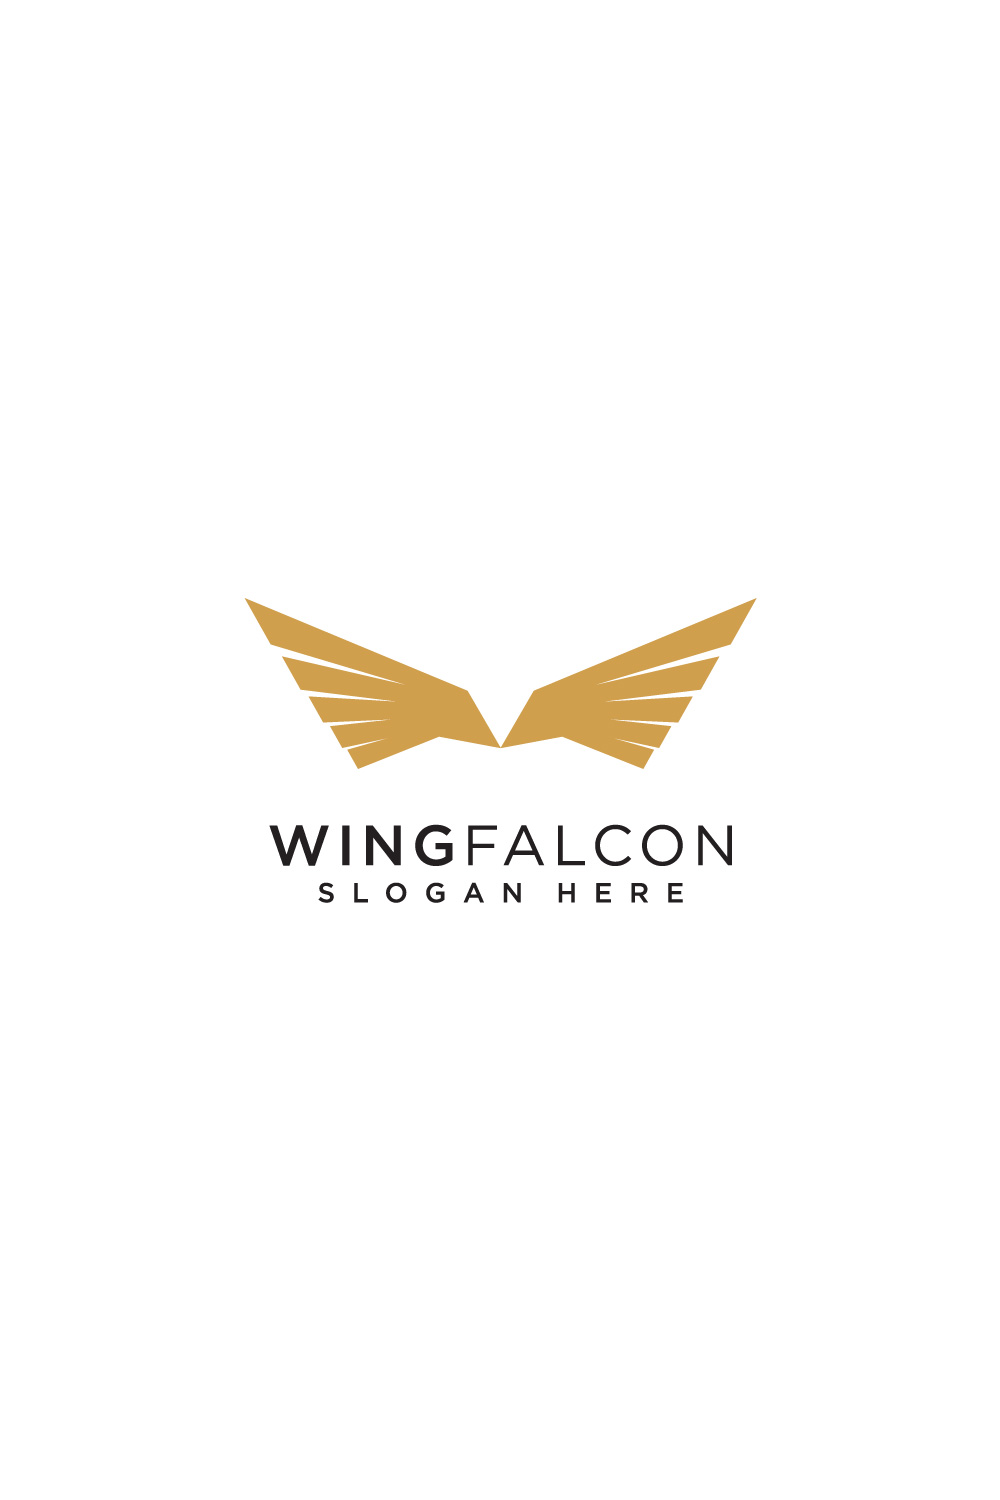 wing eagle logo pinterest preview image.